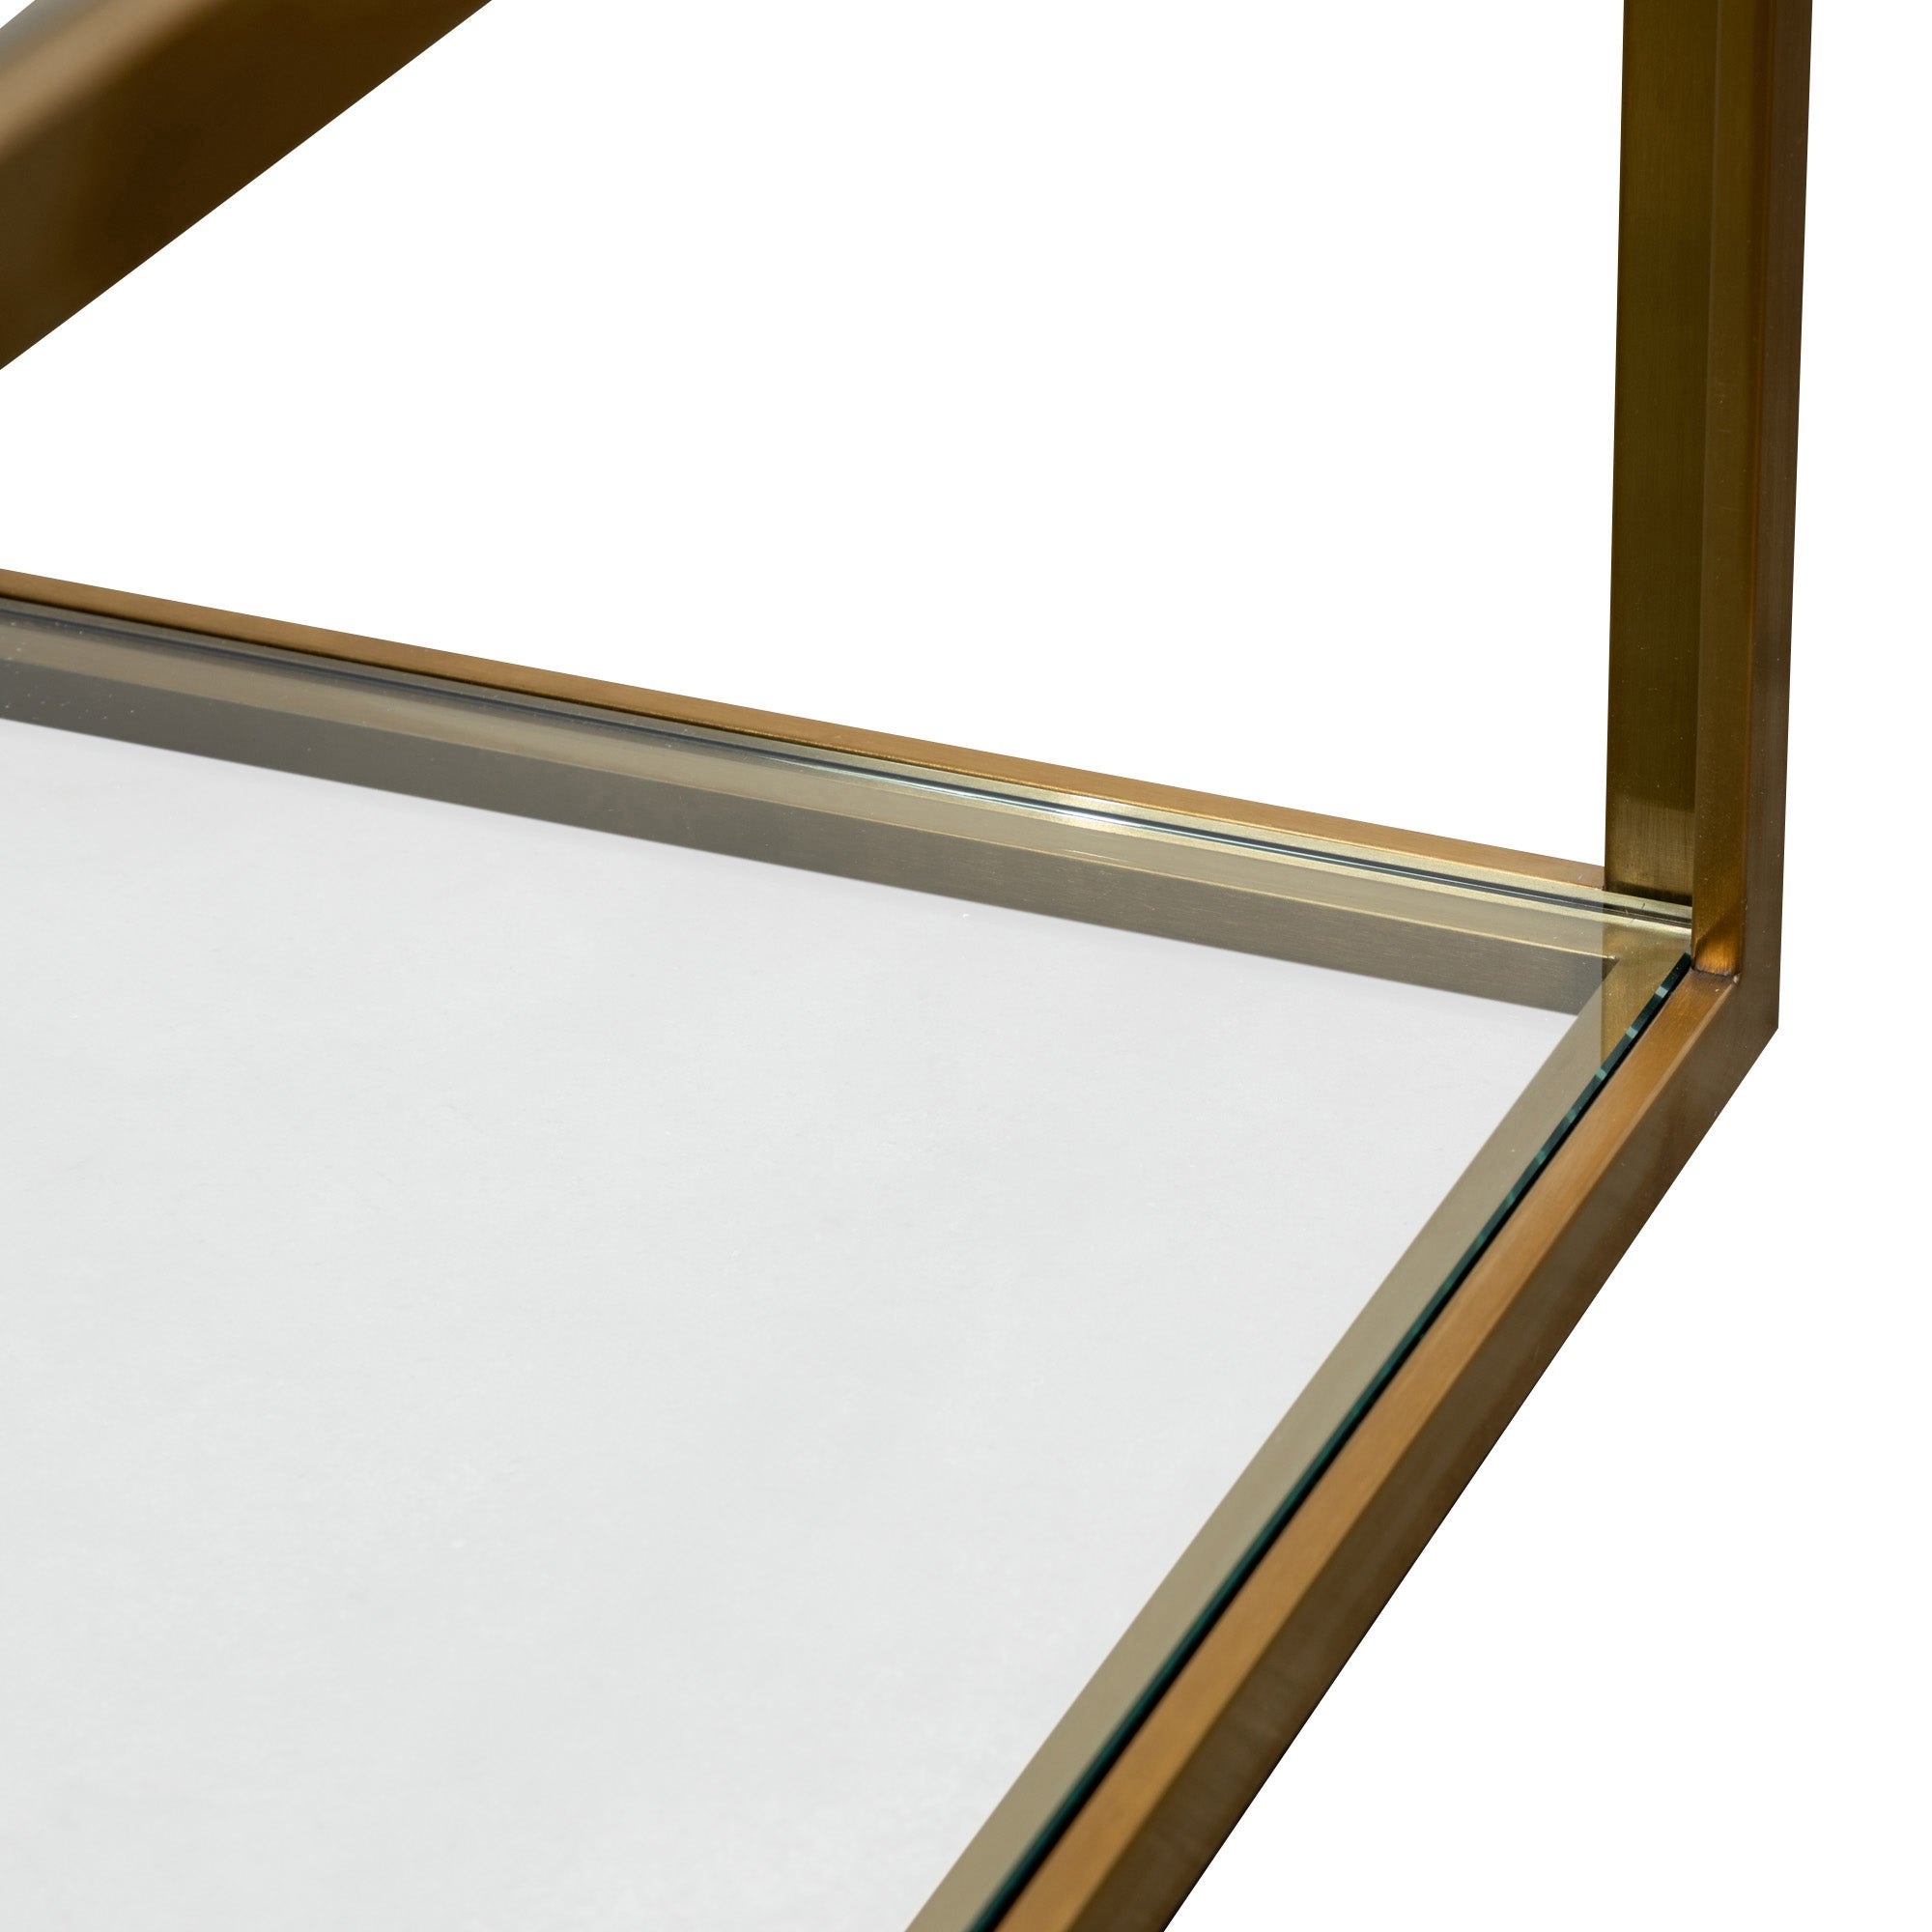 1M Glass Coffee Table - Gold Base_4